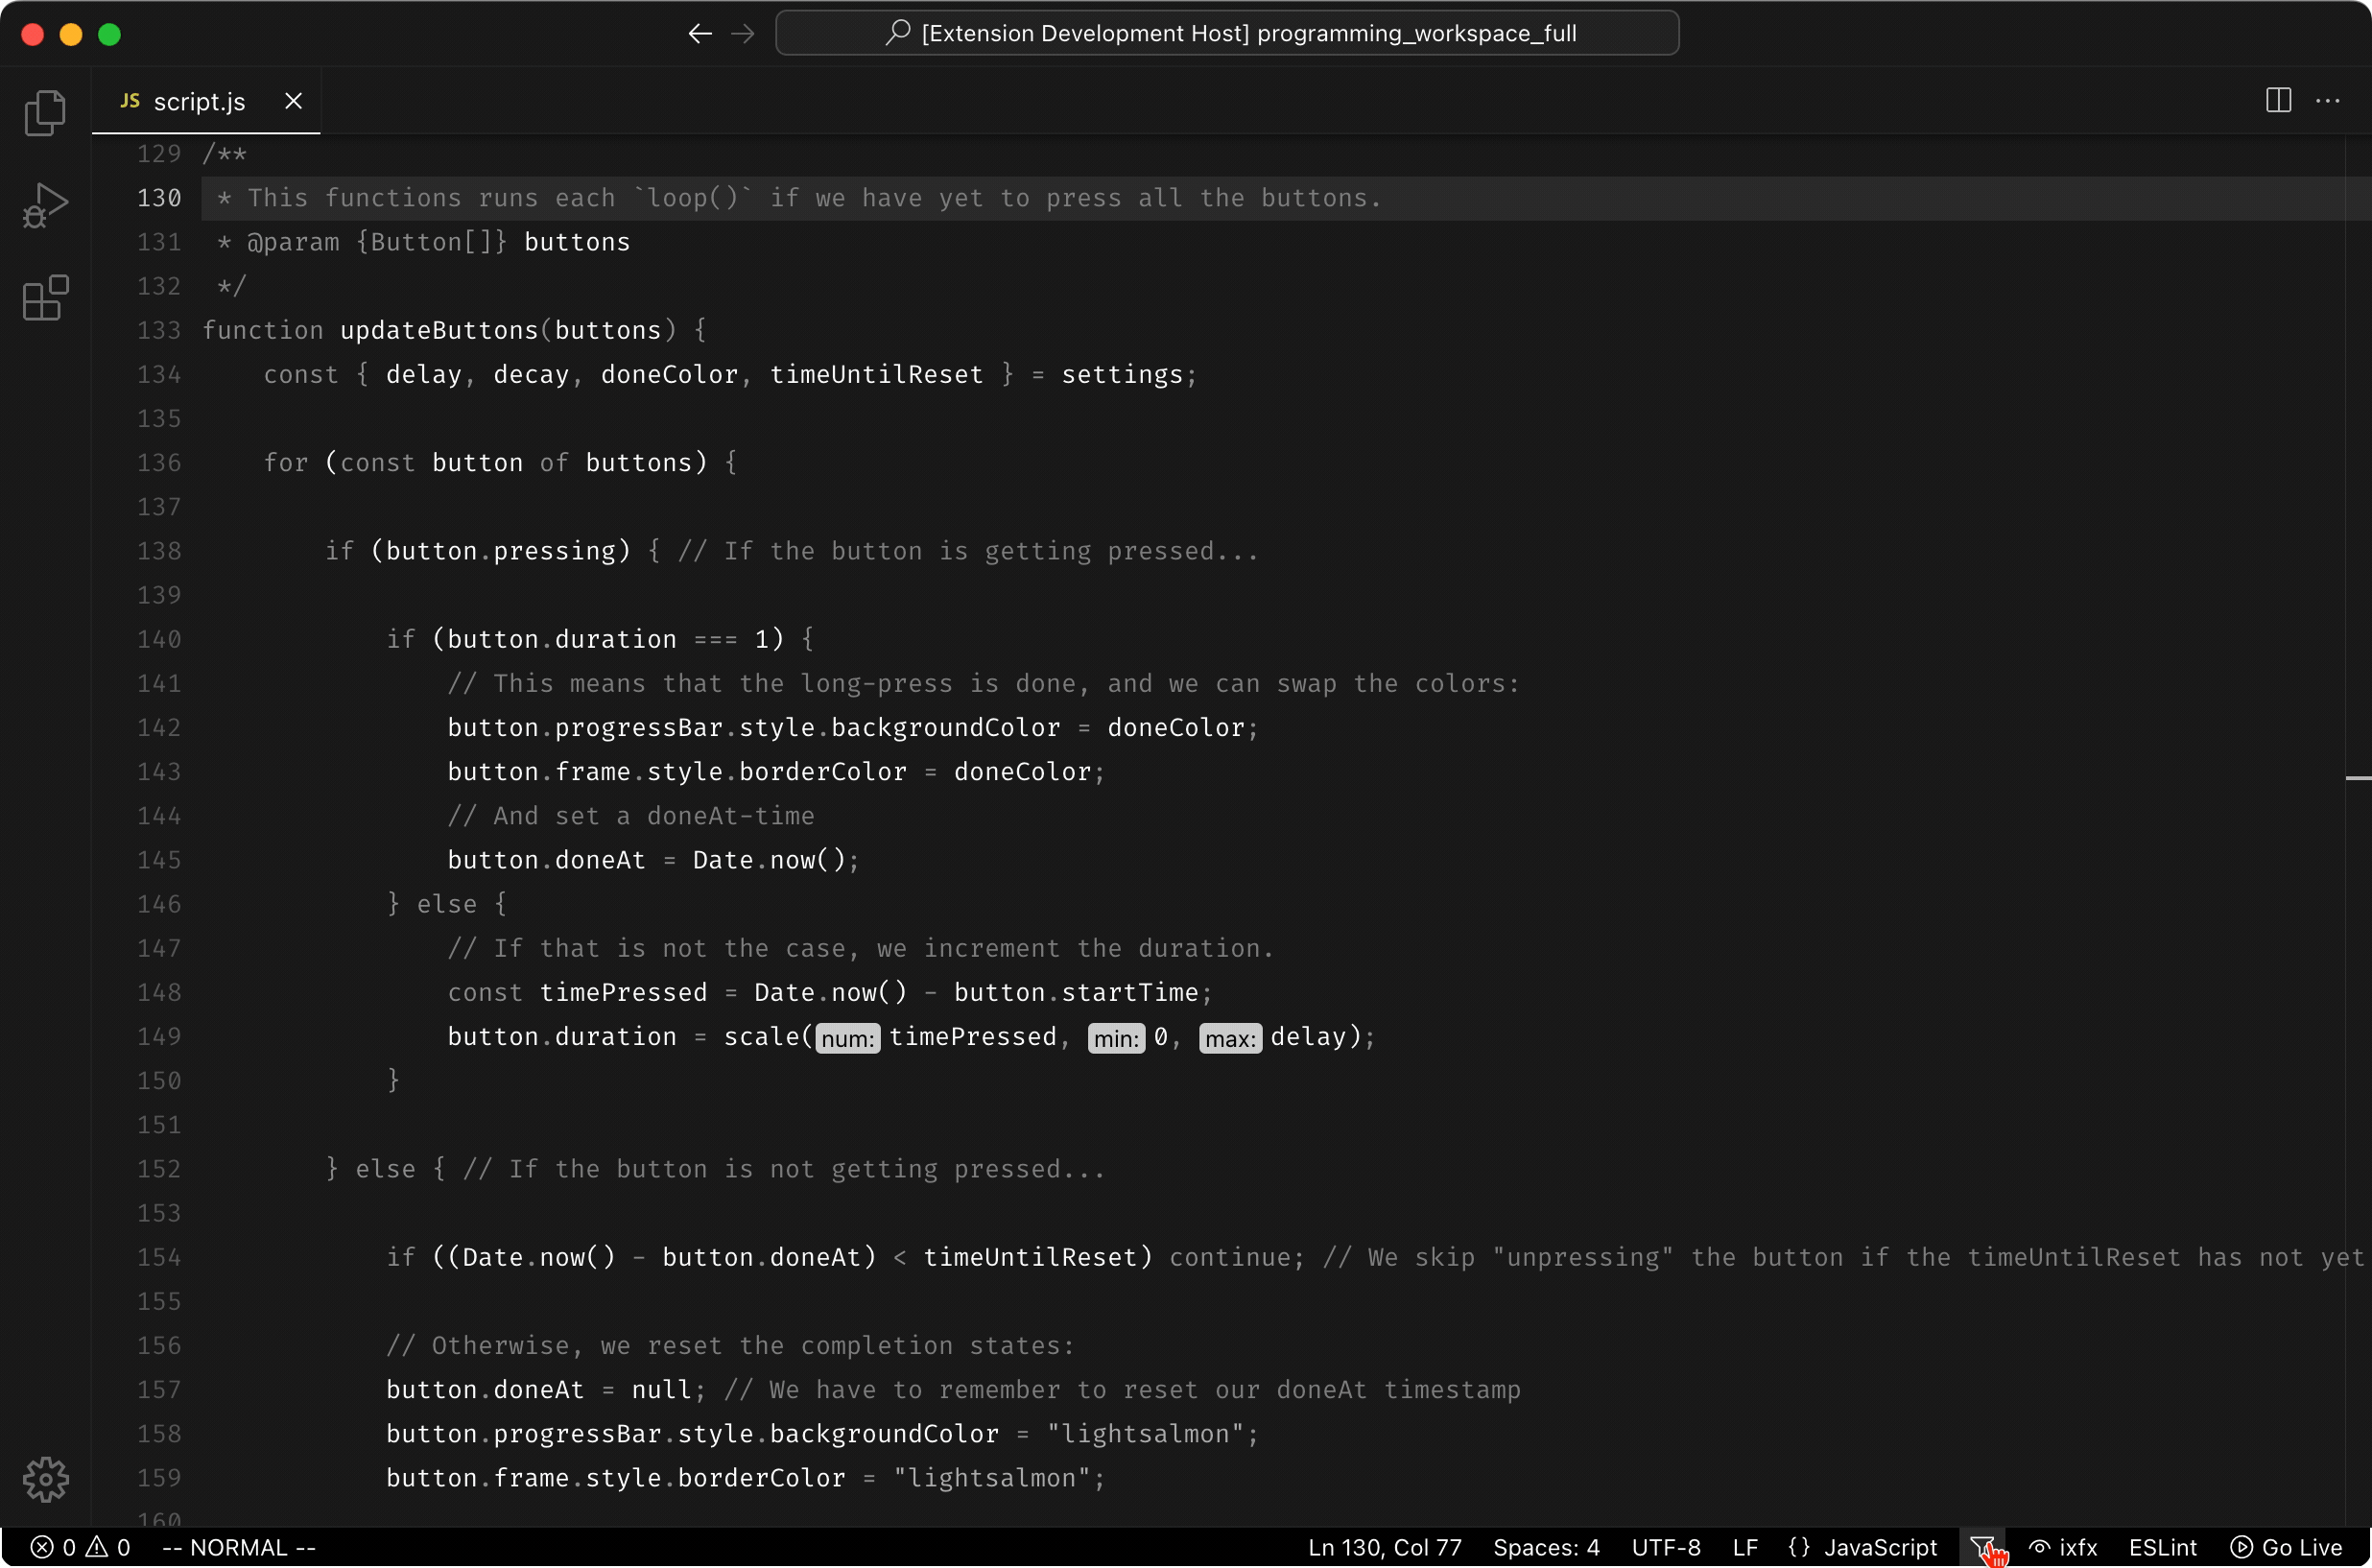 A screenshot of ixfx Highlight running in VS Code with a light theme.